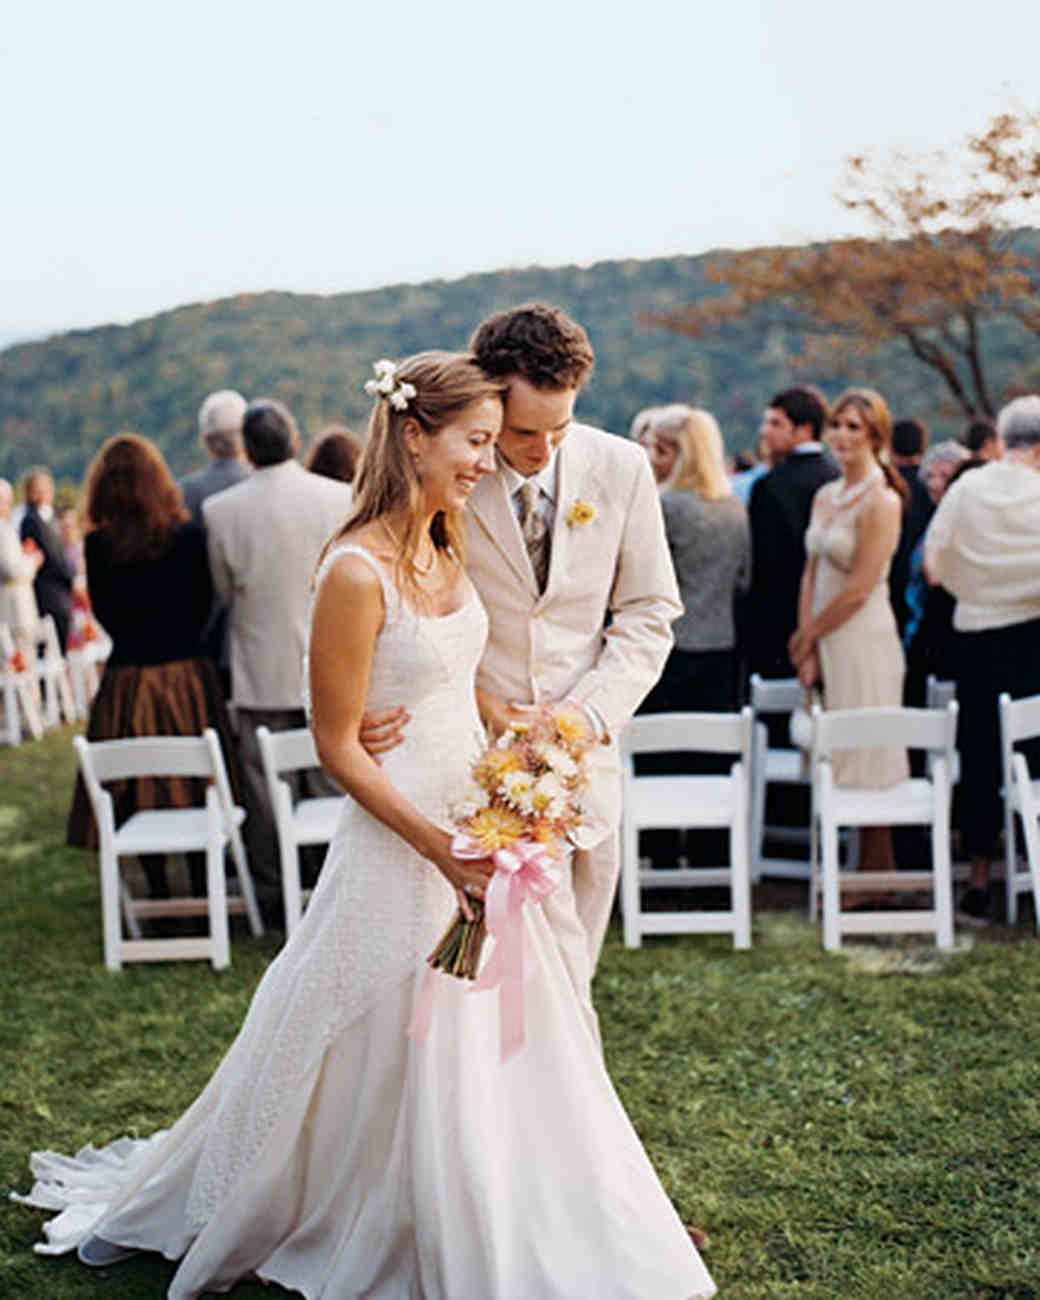 A Vibrant Casual Outdoor Wedding in Tennessee | Martha ...